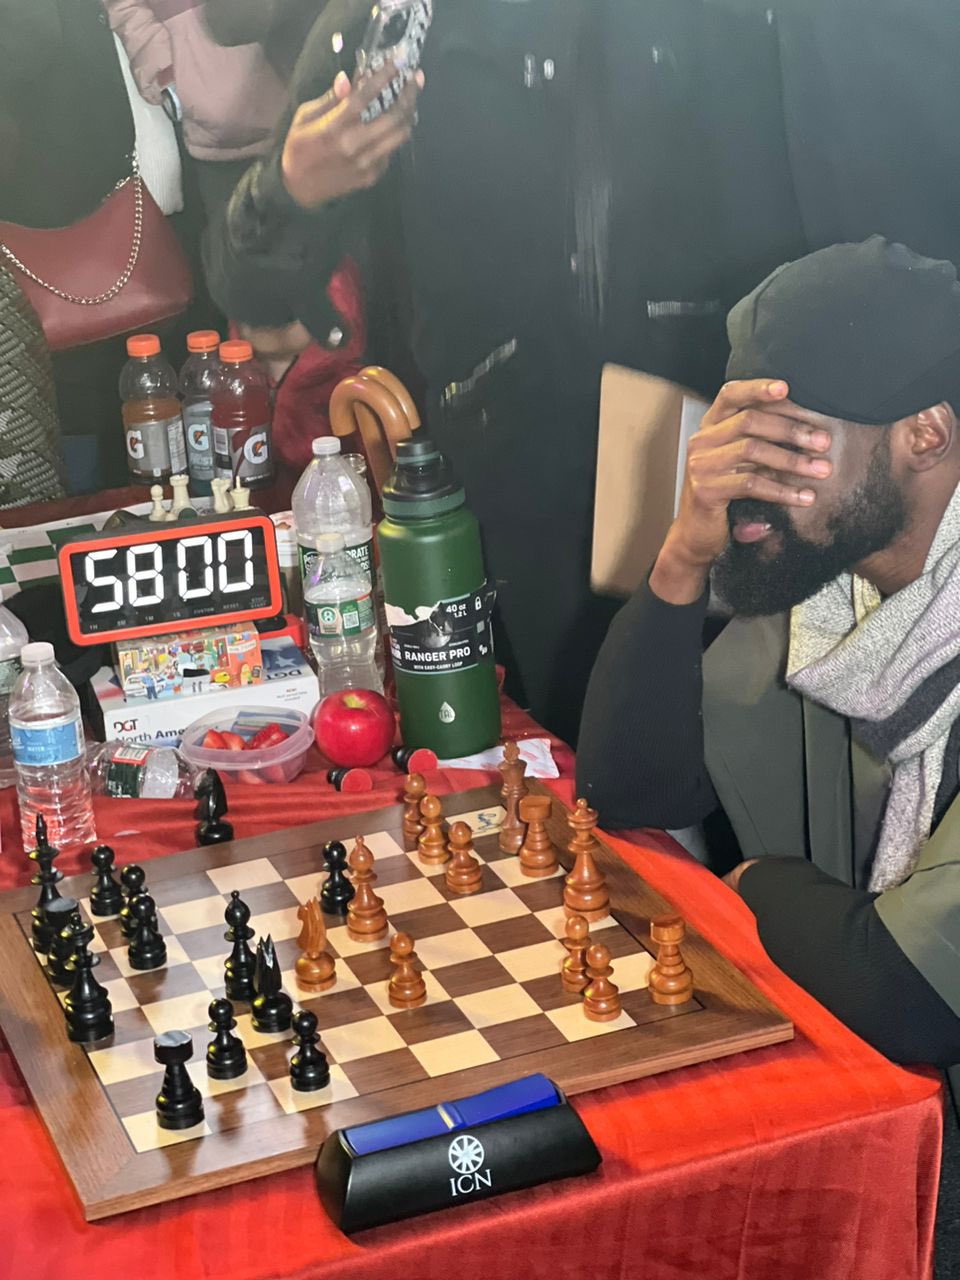 The moment Tunde Onakoya hit the 58-hour mark in his attempt to set a new world record for longest chess marathon